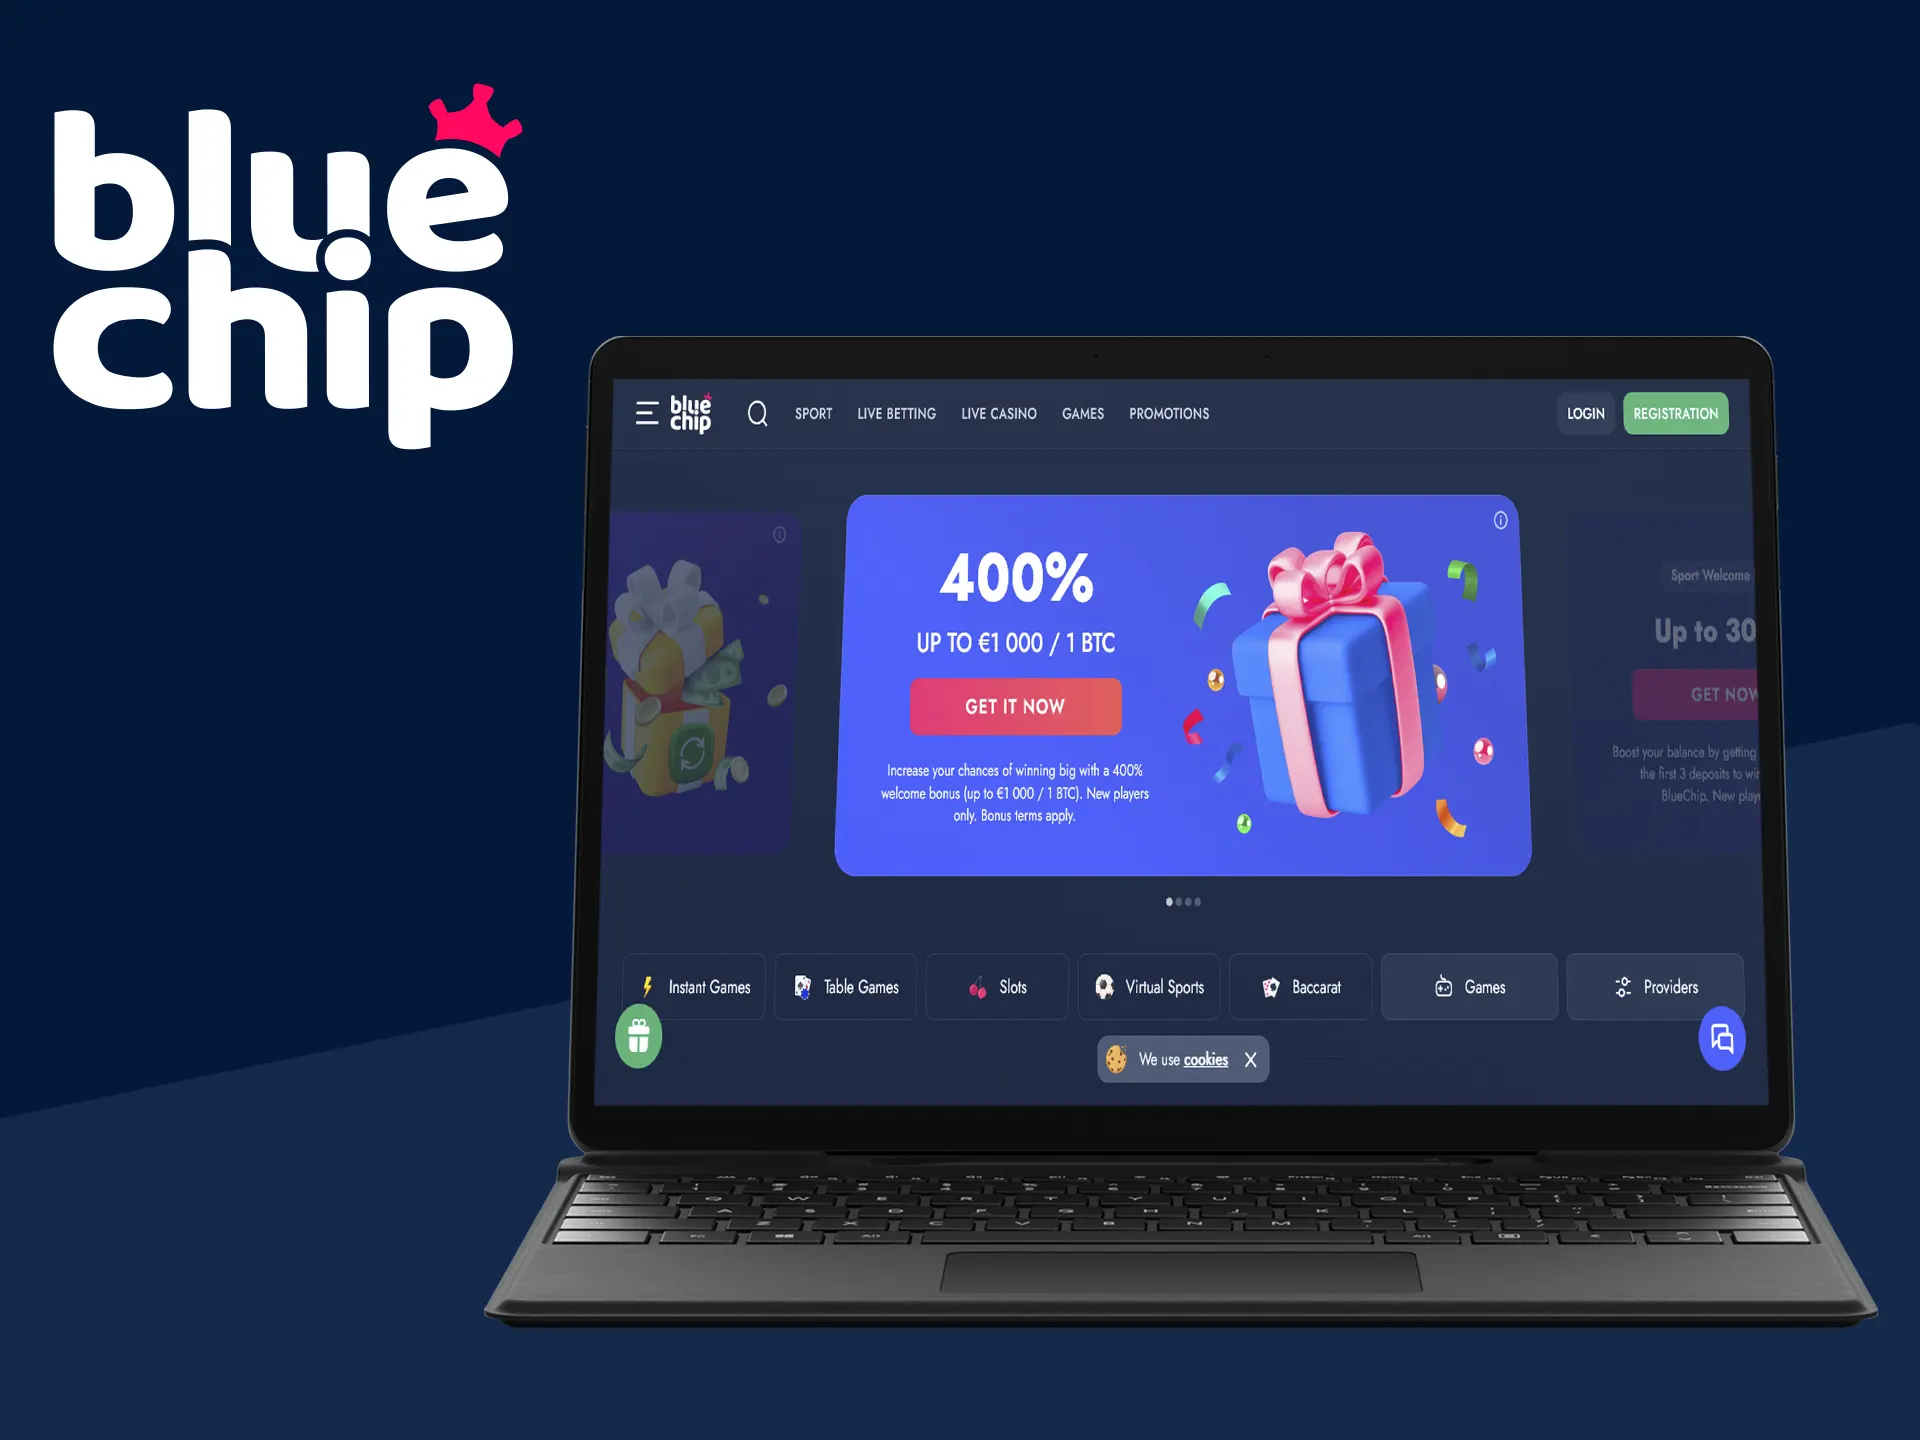 The most important thing for Bluechip is that they make the site easy to use, and with a well-designed interface and good navigation you can enjoy your betting experience.